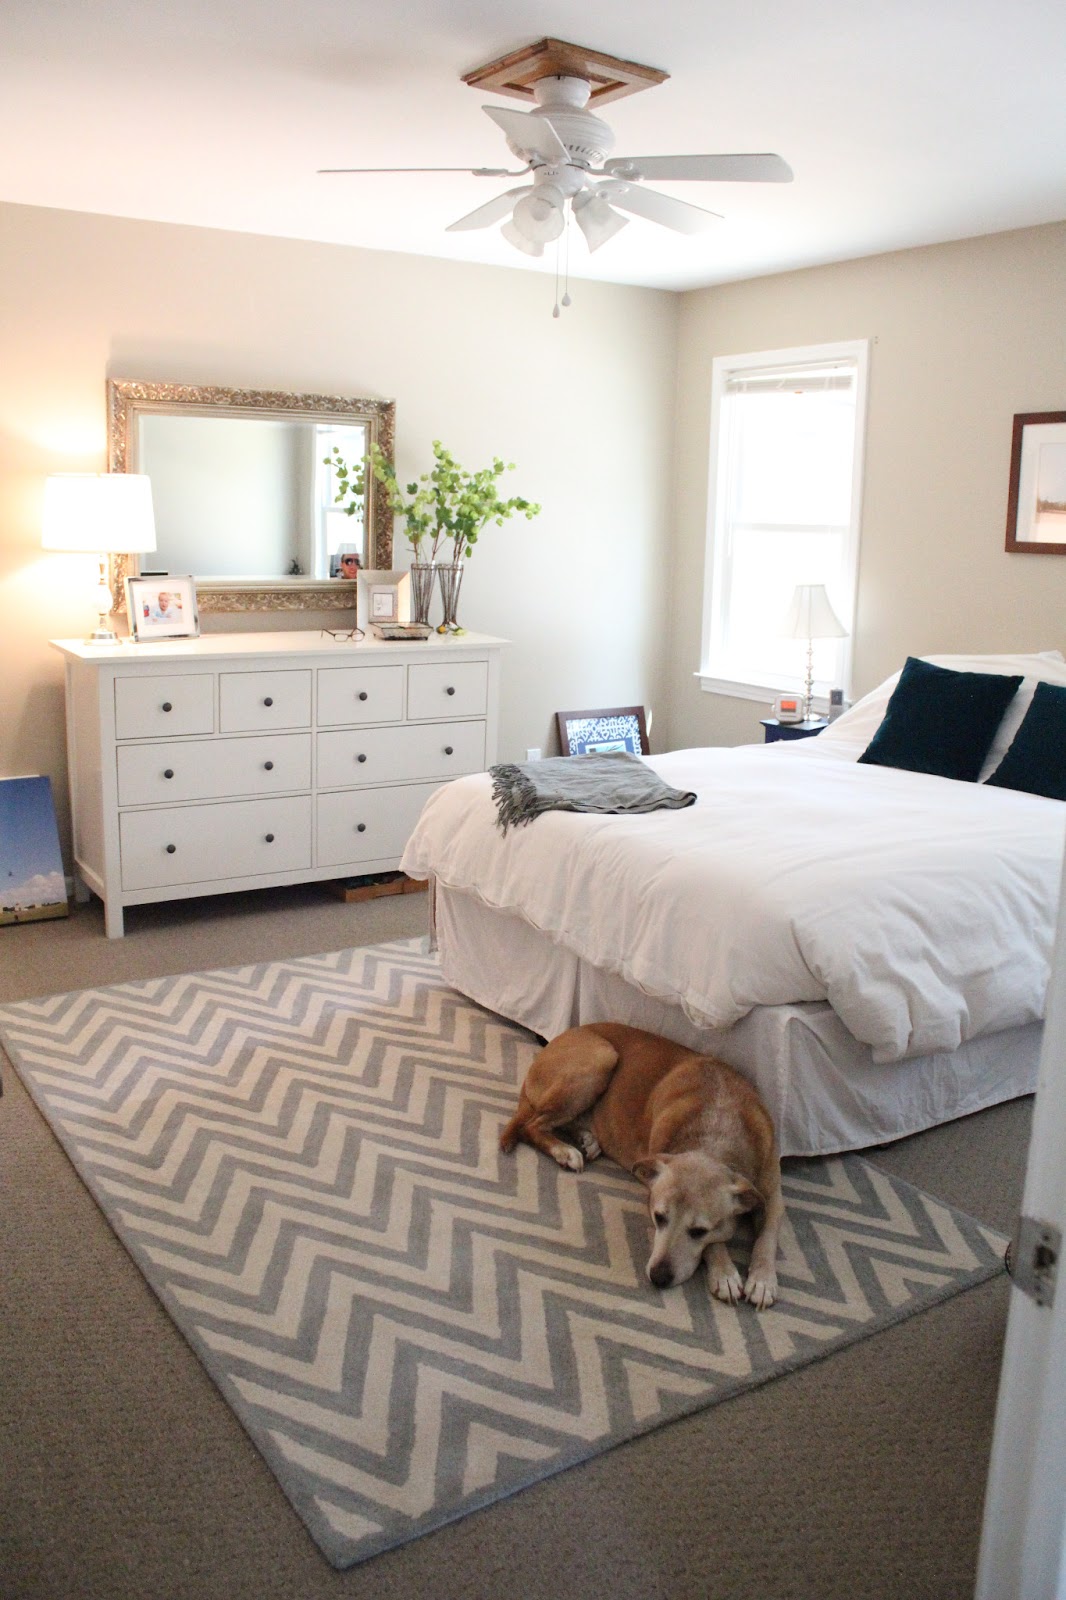 Ten June: Our Rental House: A Master Bedroom Tour